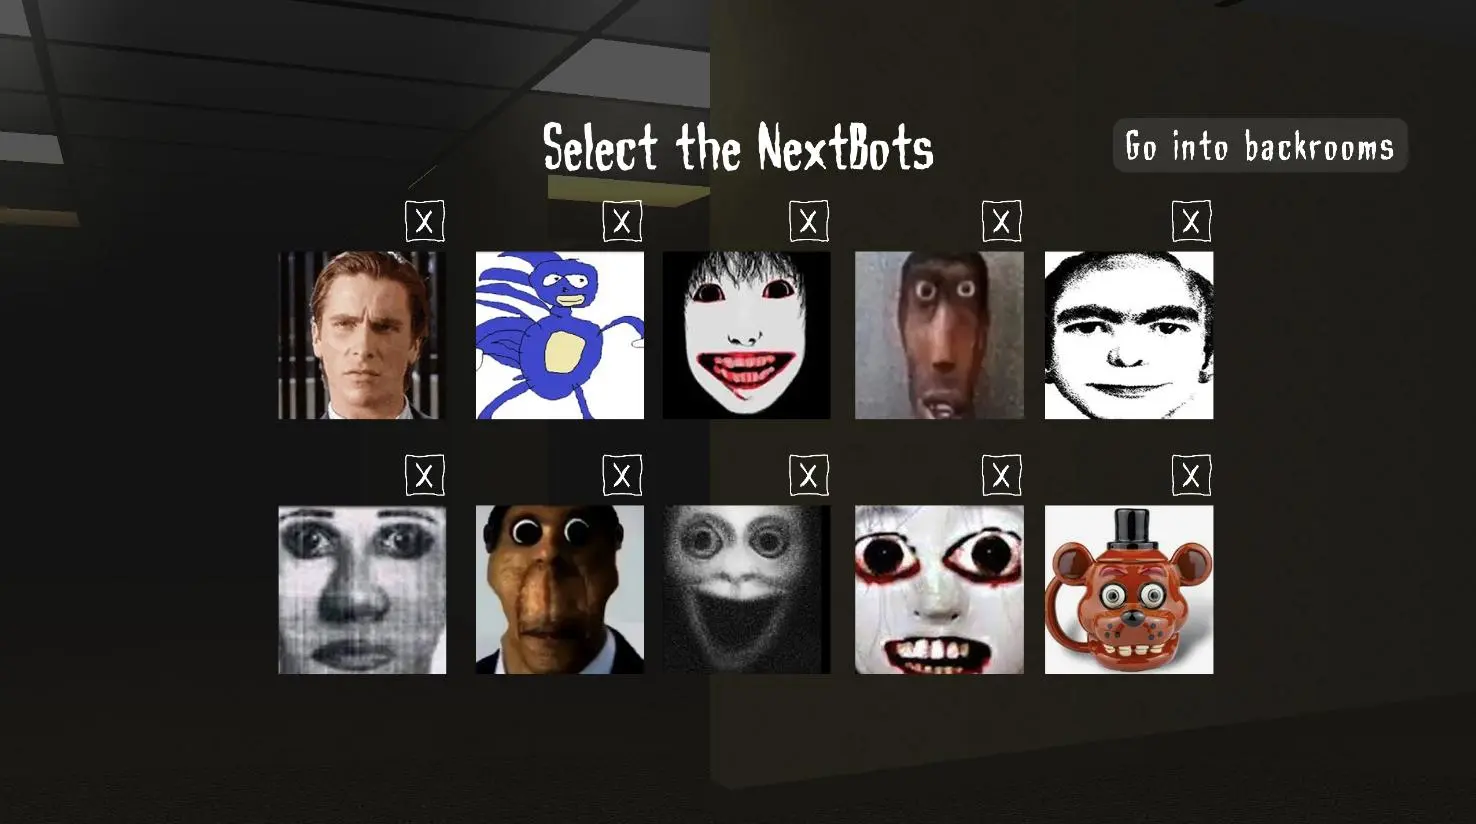 Download Obunga Nextbots in backrooms android on PC